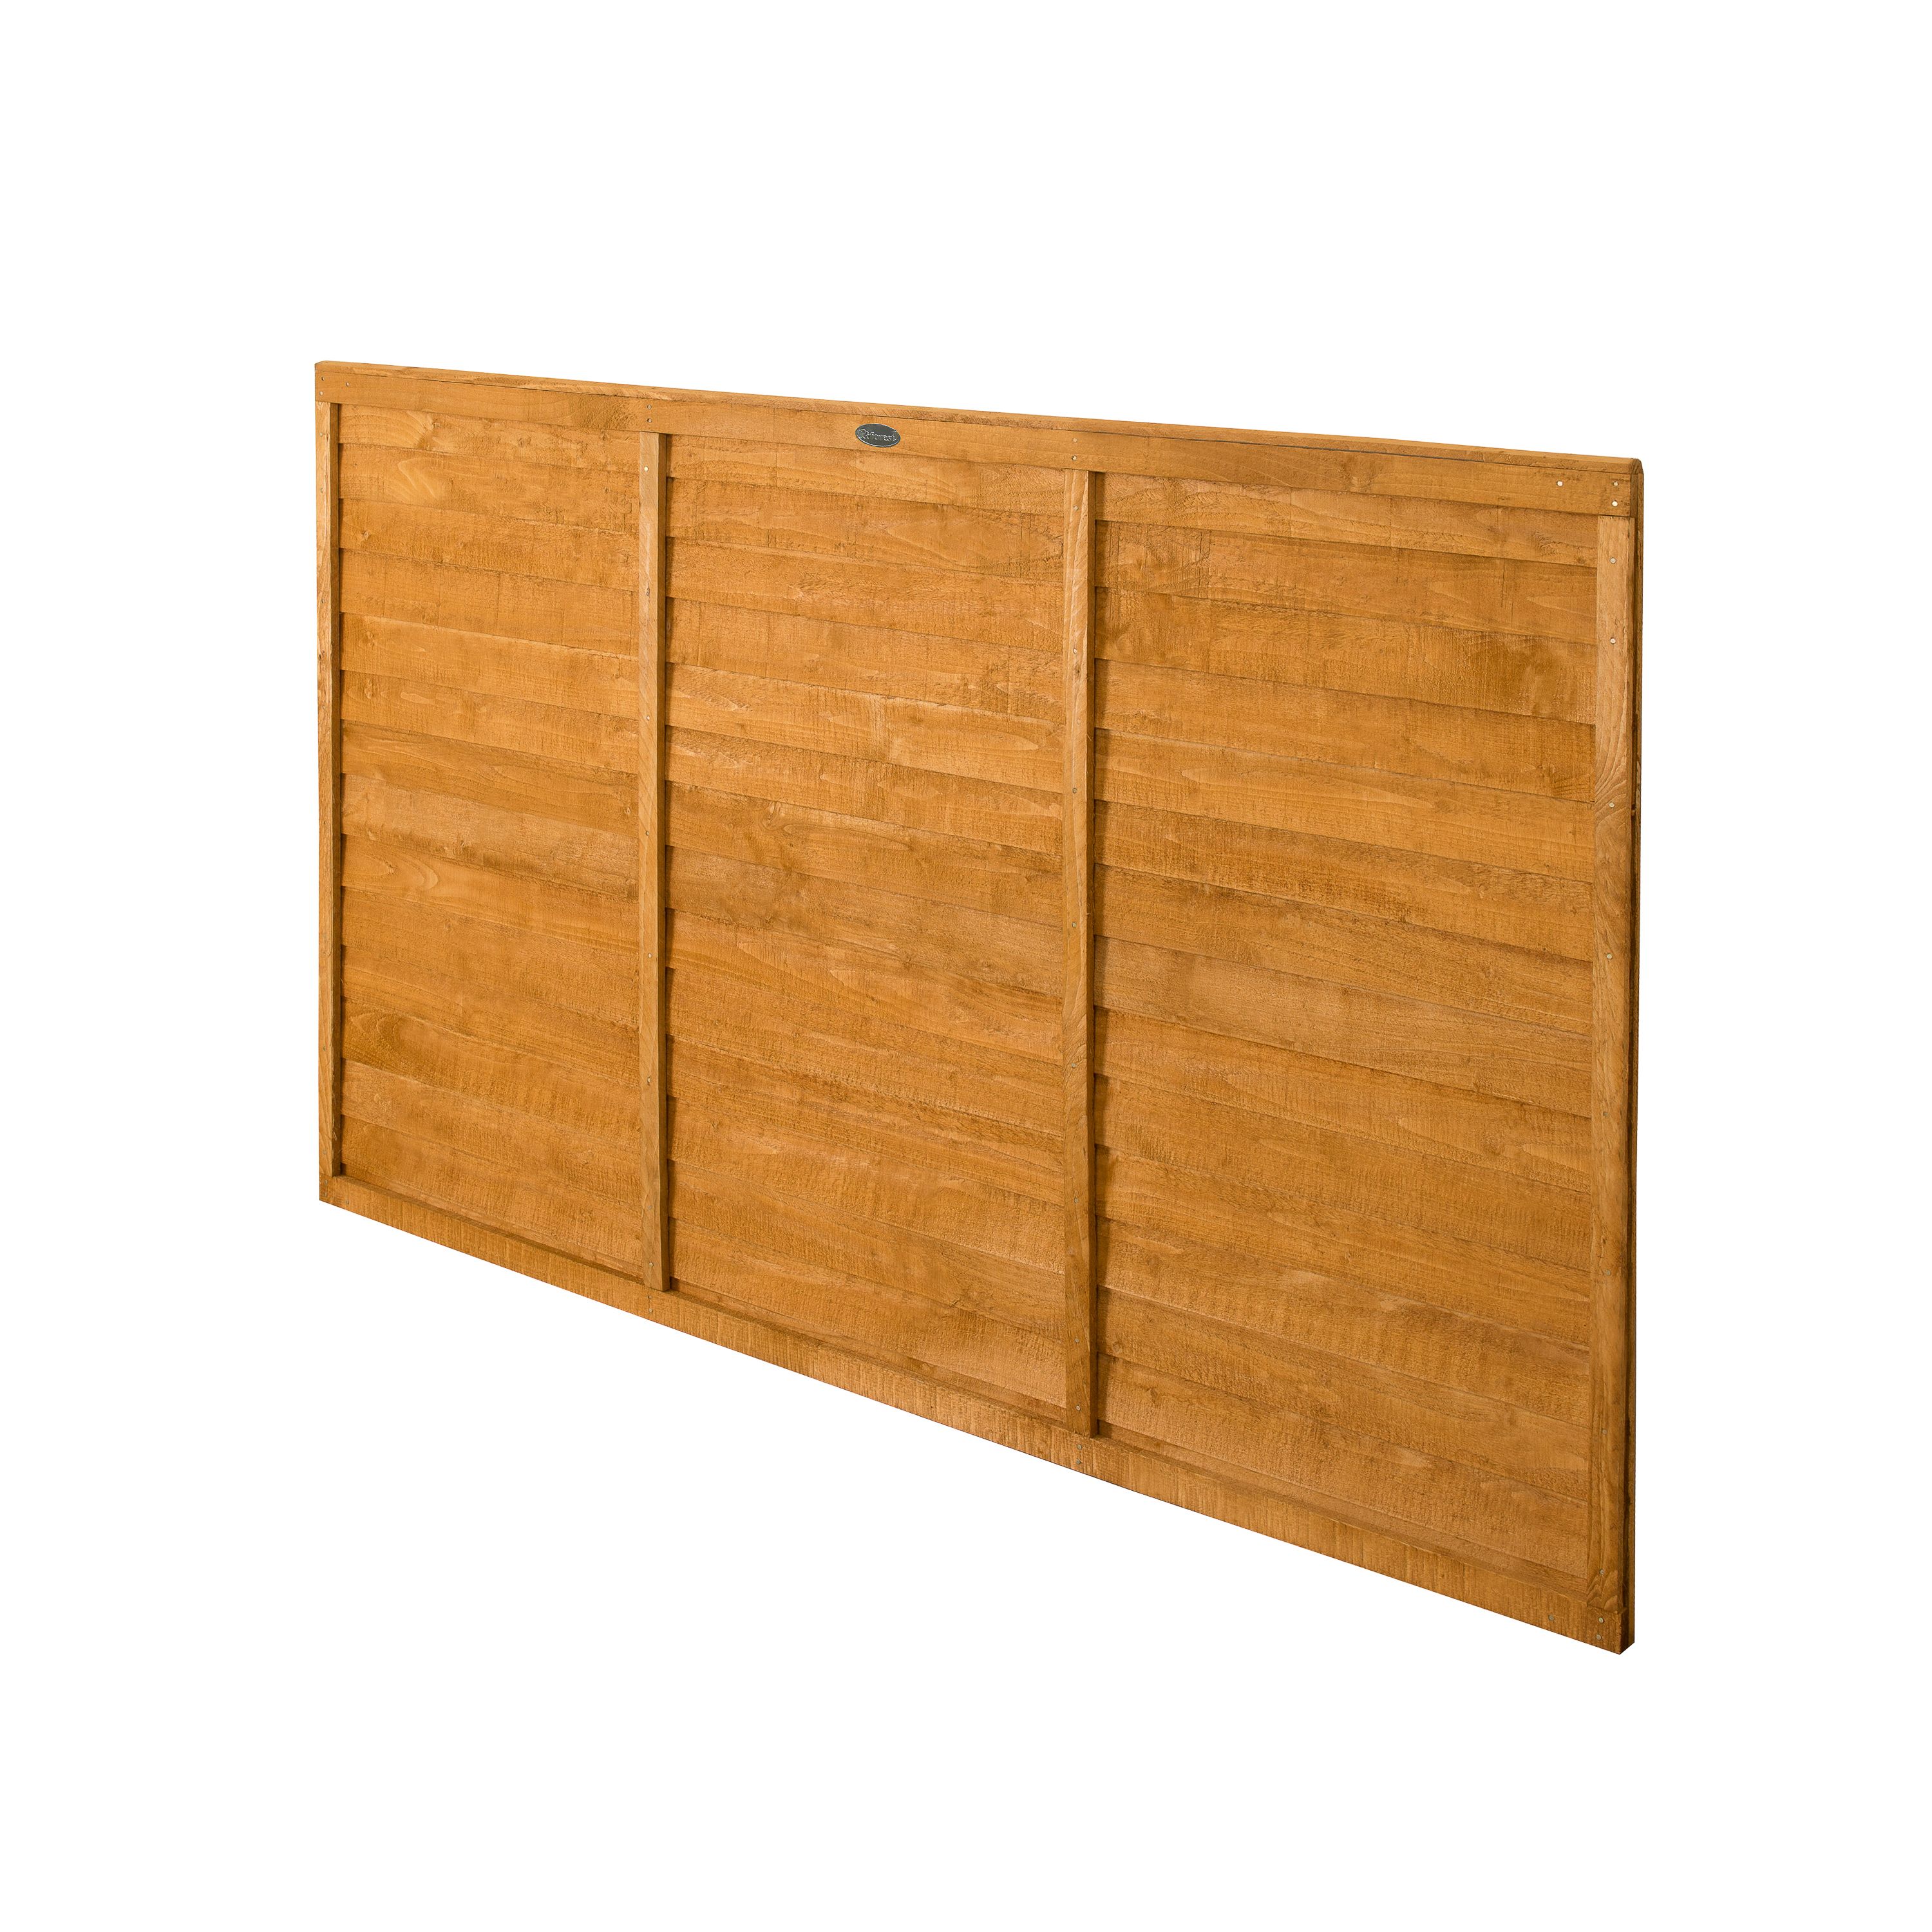 Forest Garden Straight edge Lap Dip treated 4ft Wooden Fence panel (W)1.83m (H)1.21m